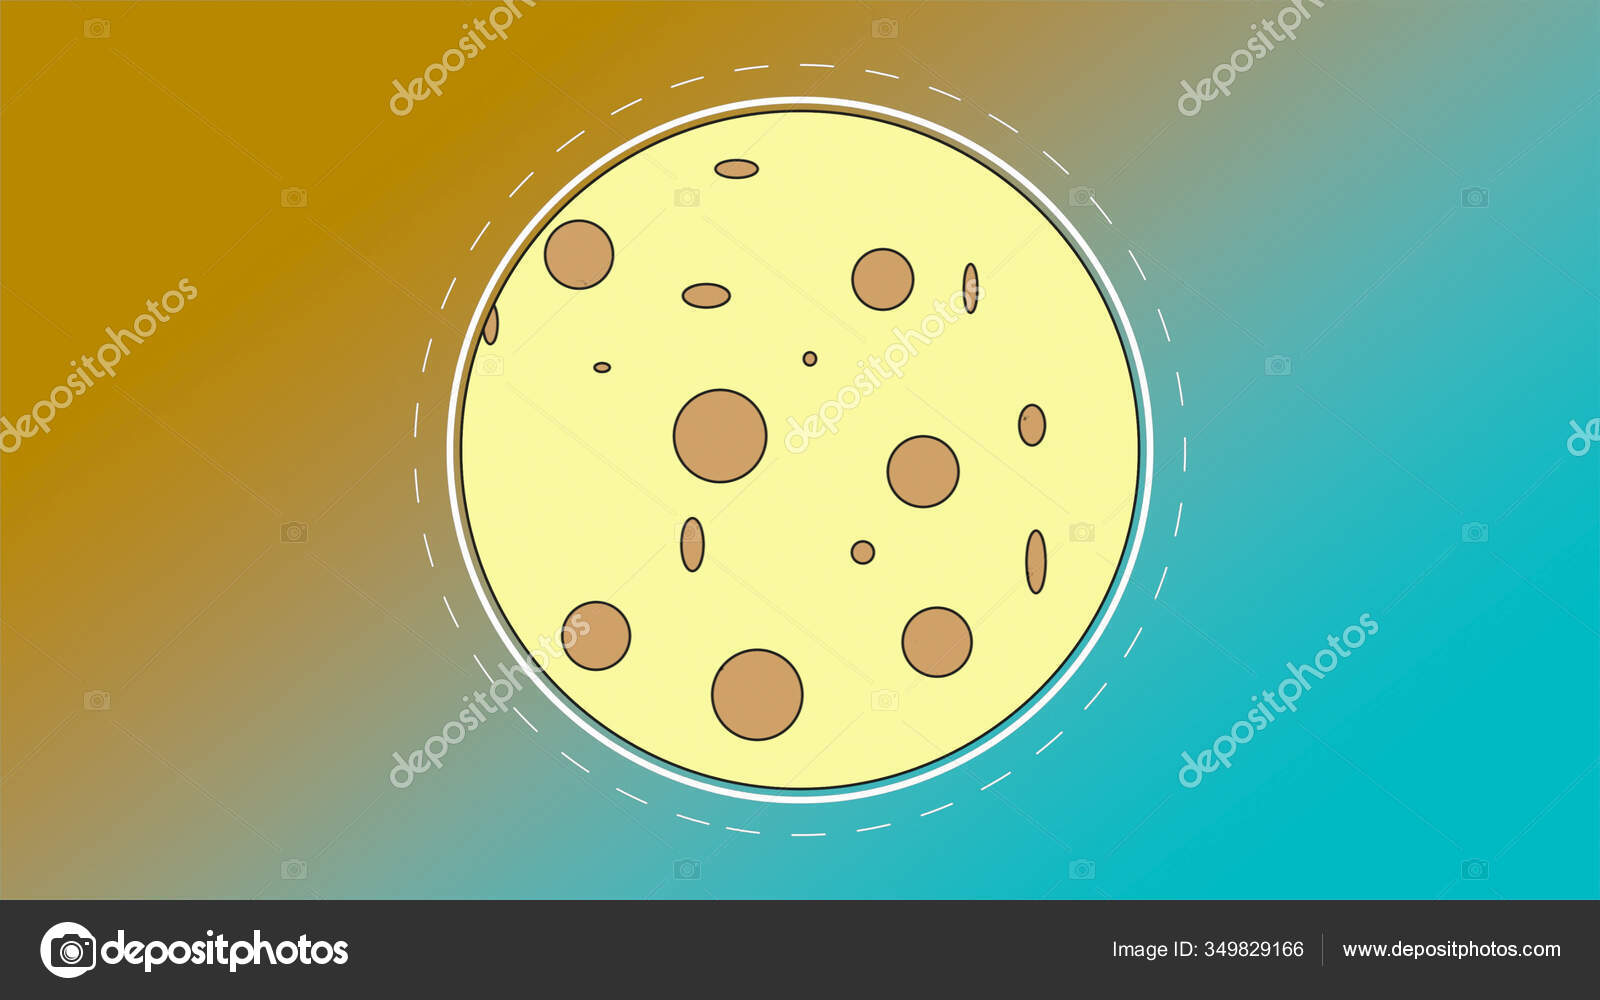 Cartoon moon looking like cheese, turning over bokeh yellow-blue  background. Stock Photo by ©VFX 349829166